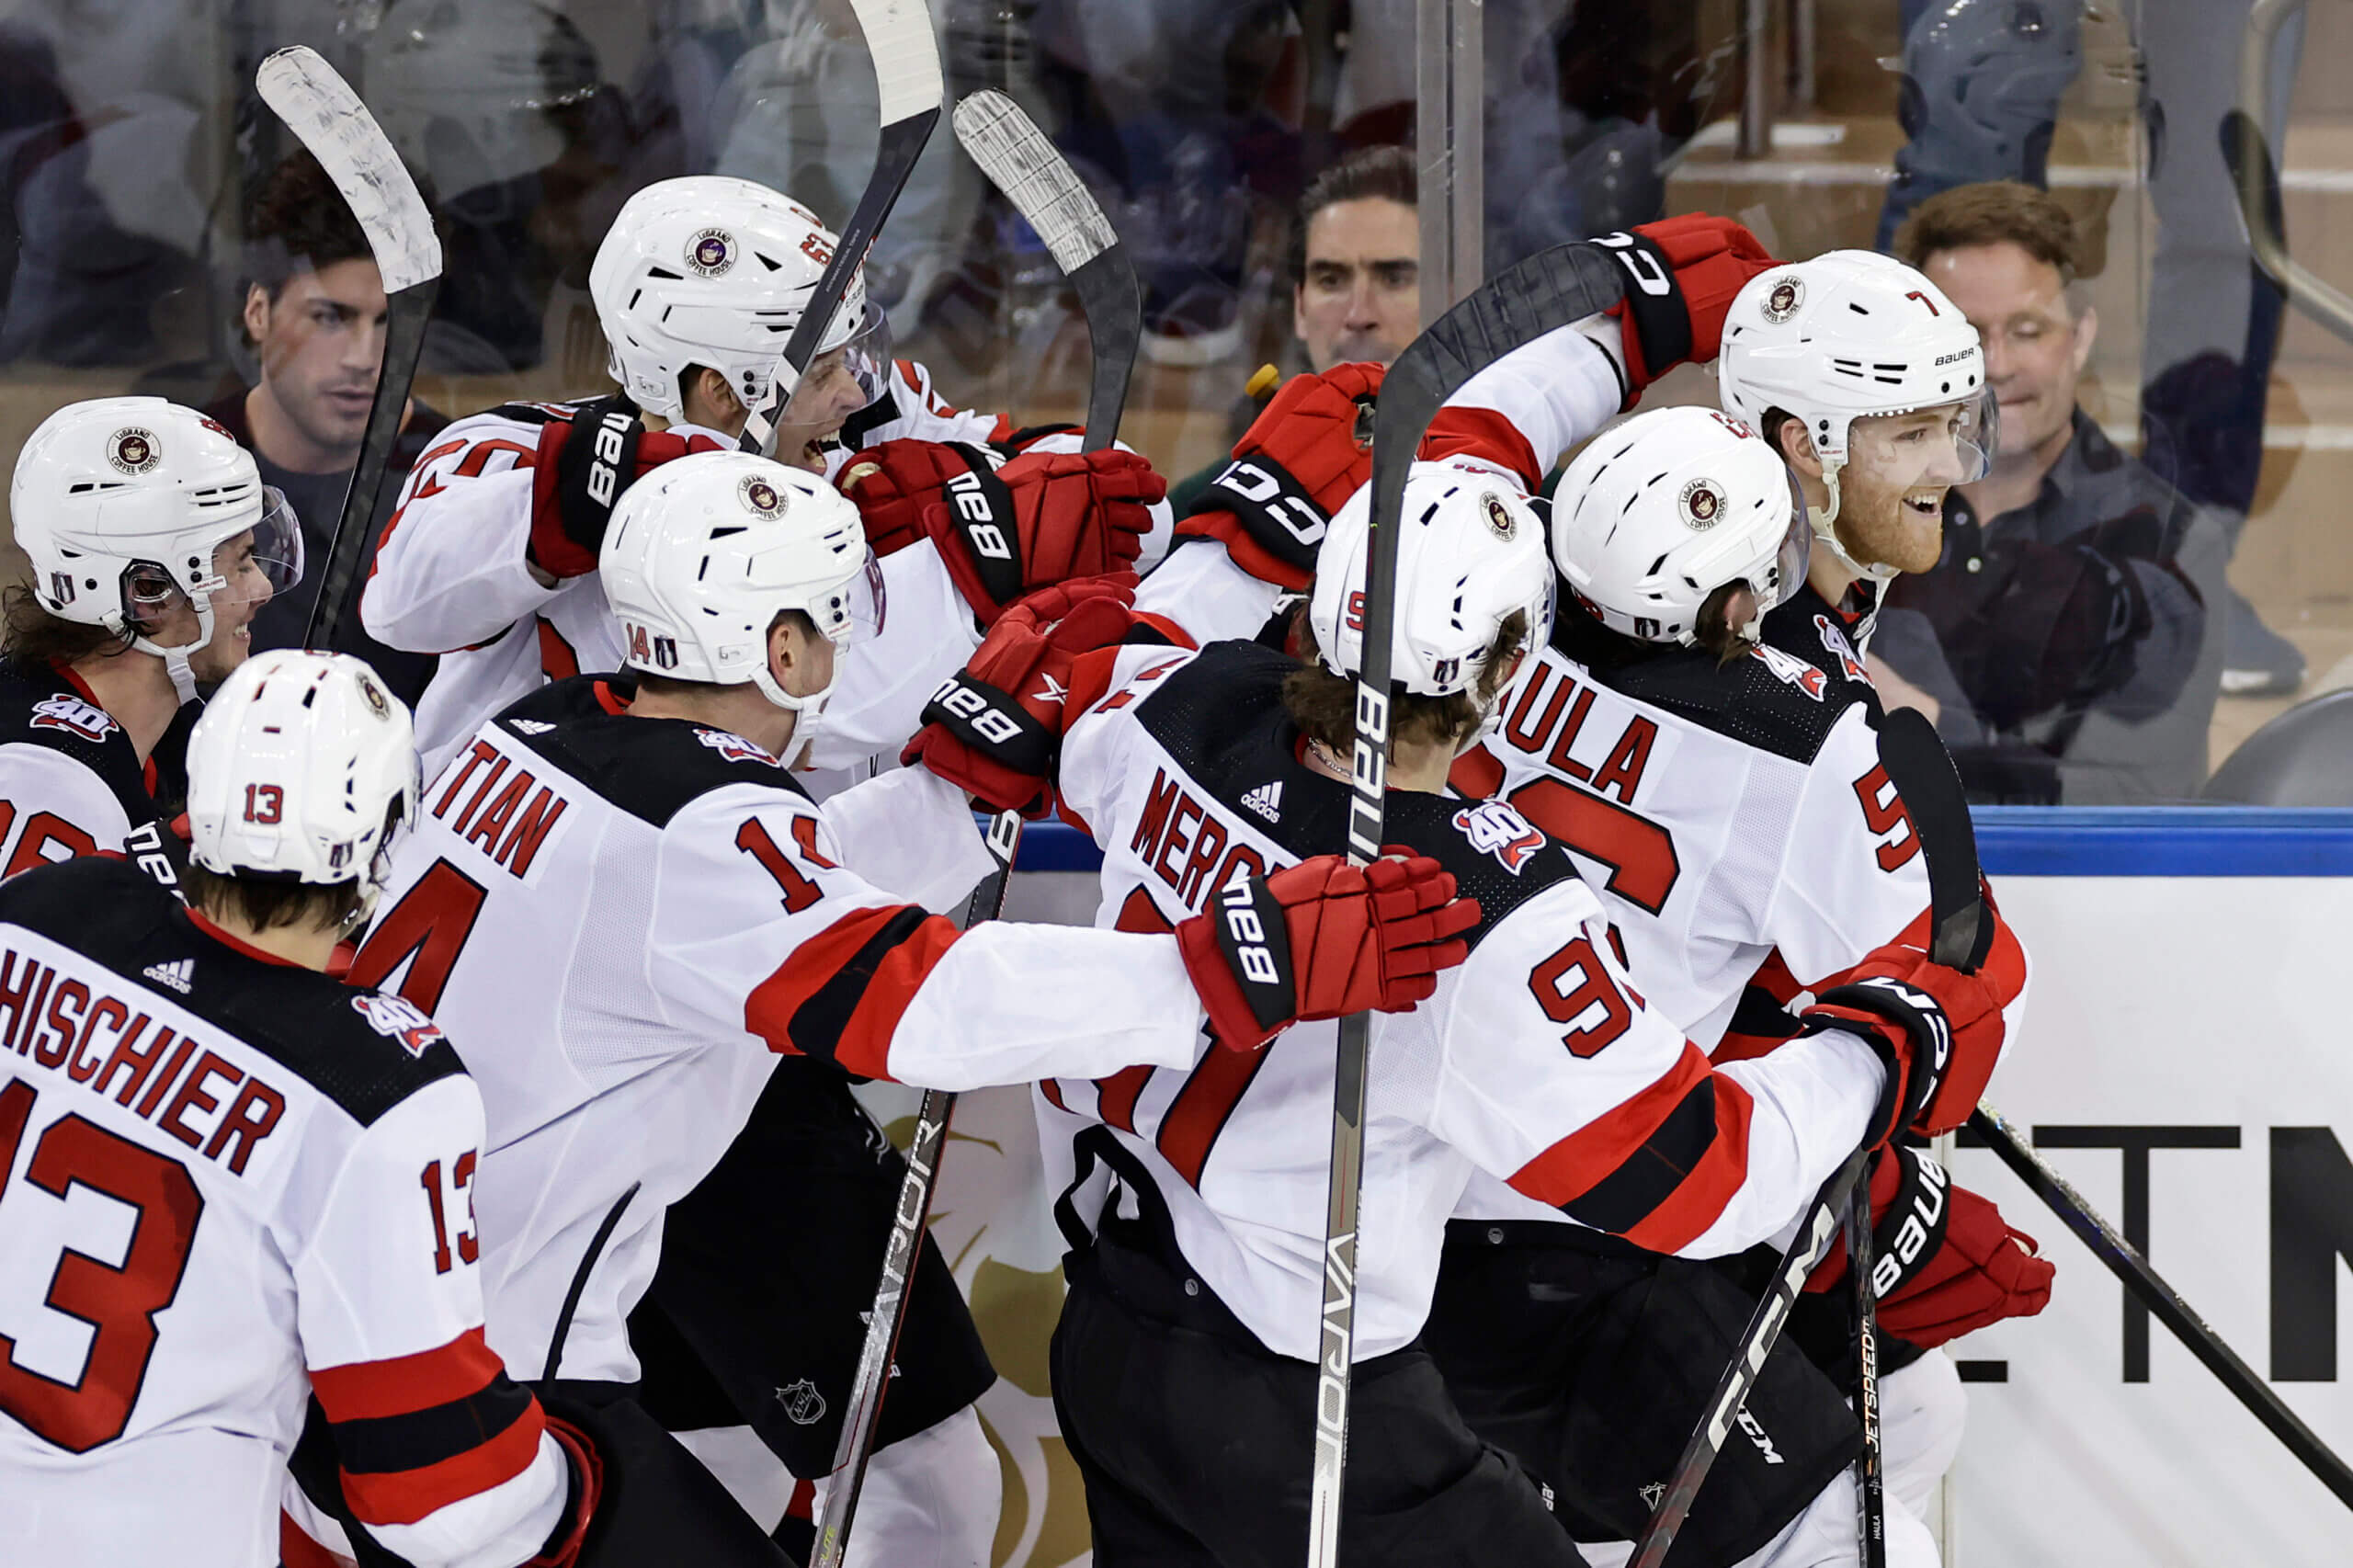 Rangers fall to Devils, fail to move into tie for second in division